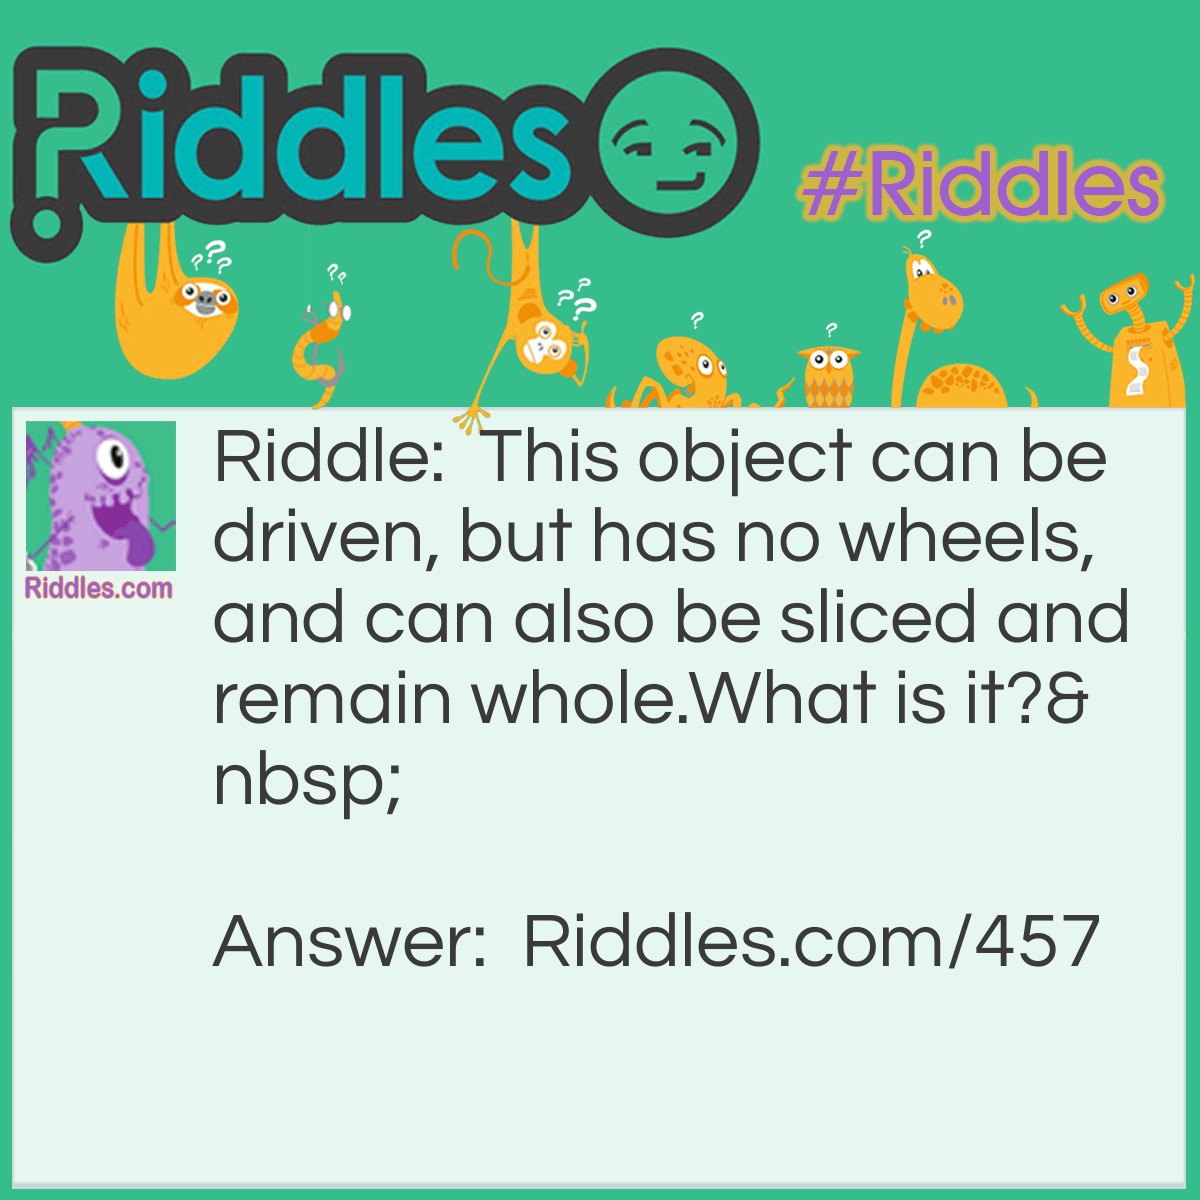 Riddle: This object can be driven, but has no wheels, and can also be sliced and remain whole.
What is it? Answer: A Golf Ball.